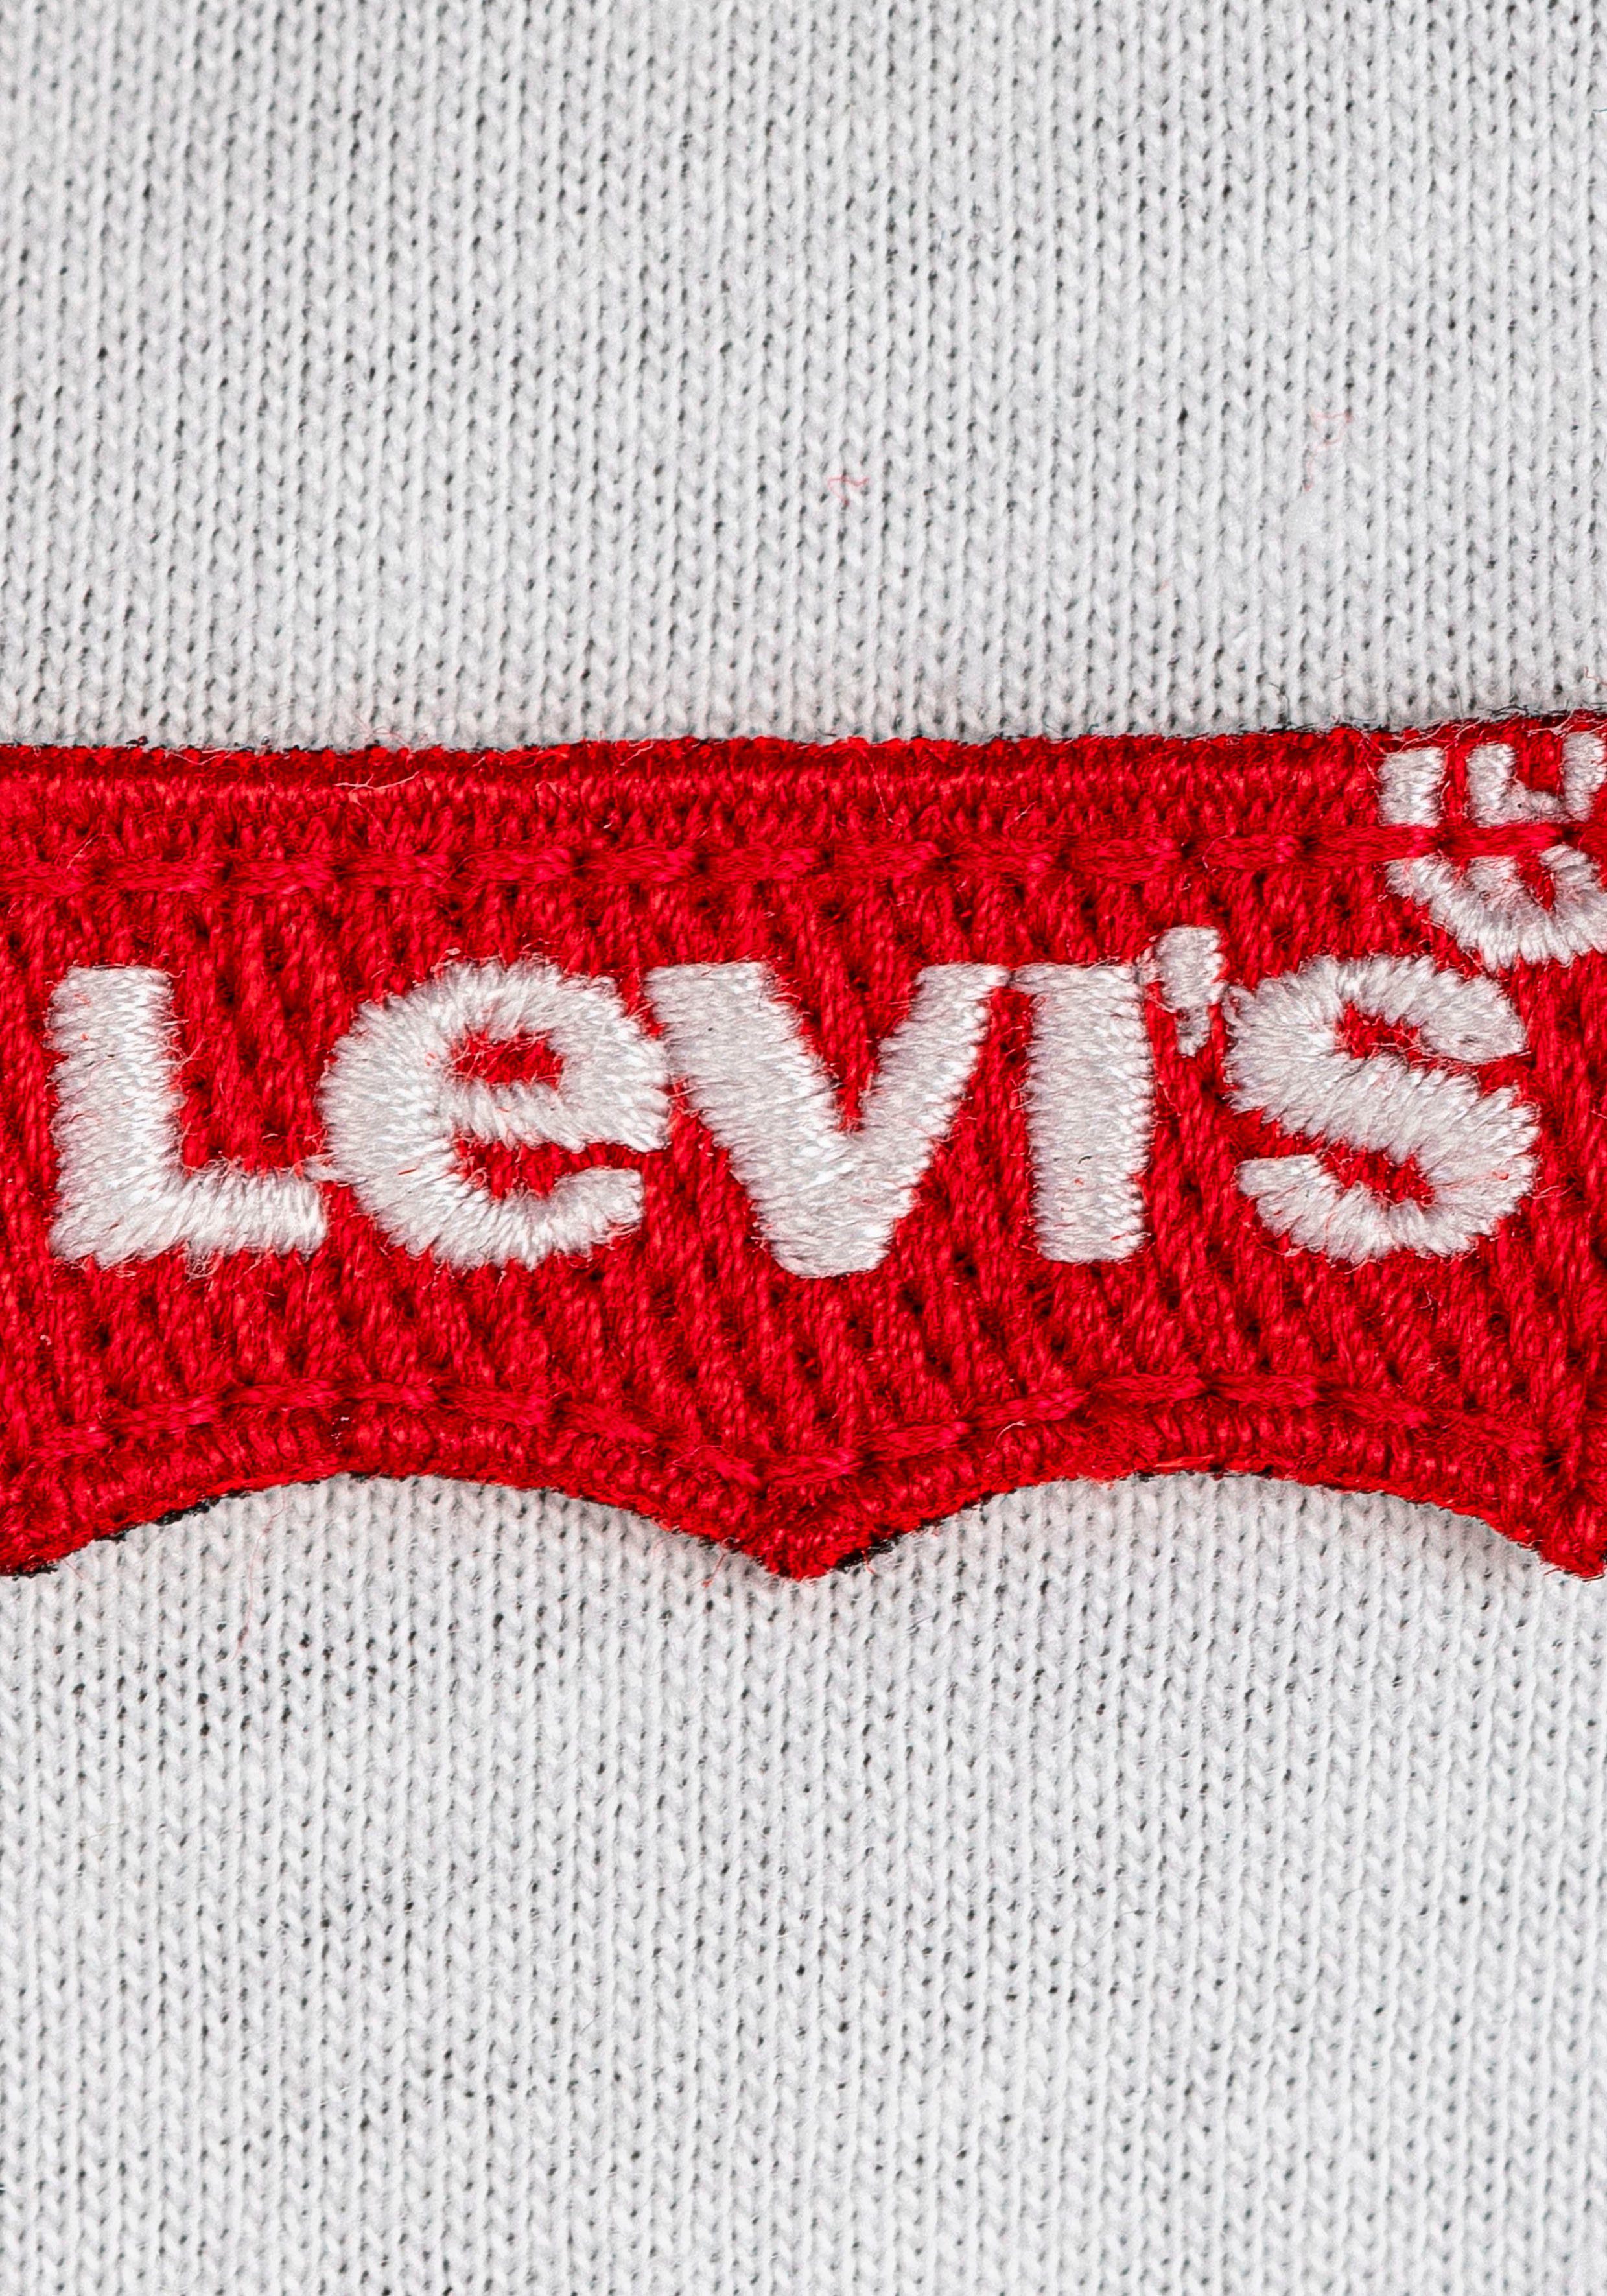 Levi's® Kids T-Shirt white for BOYS CHEST HIT BATWING